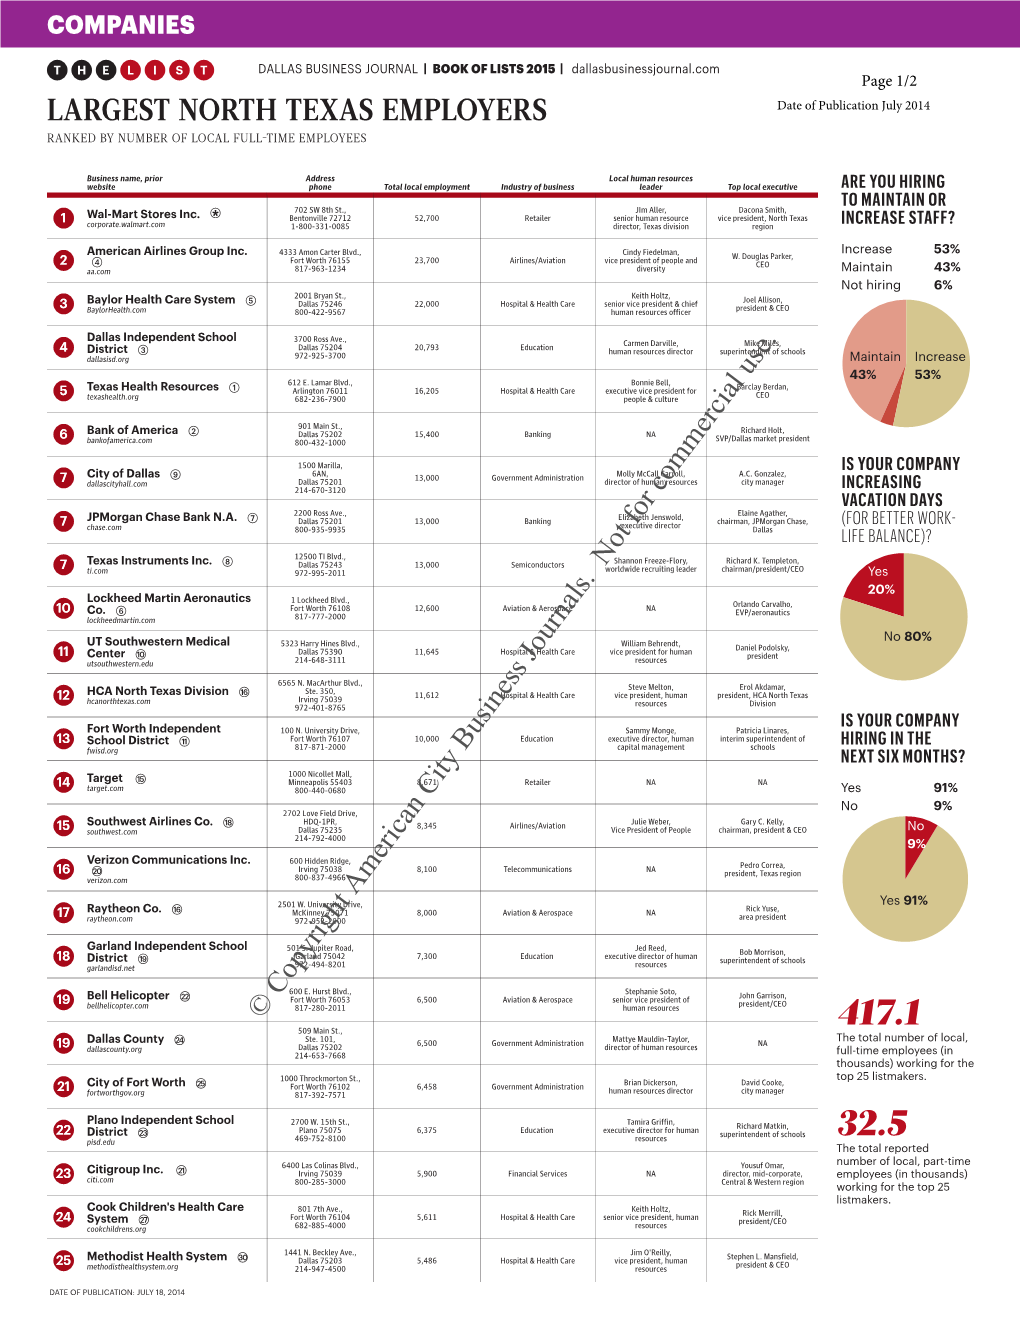 LARGEST NORTH TEXAS EMPLOYERS Date of Publication July 2014 RANKED by NUMBER of LOCAL FULL-TIME EMPLOYEES